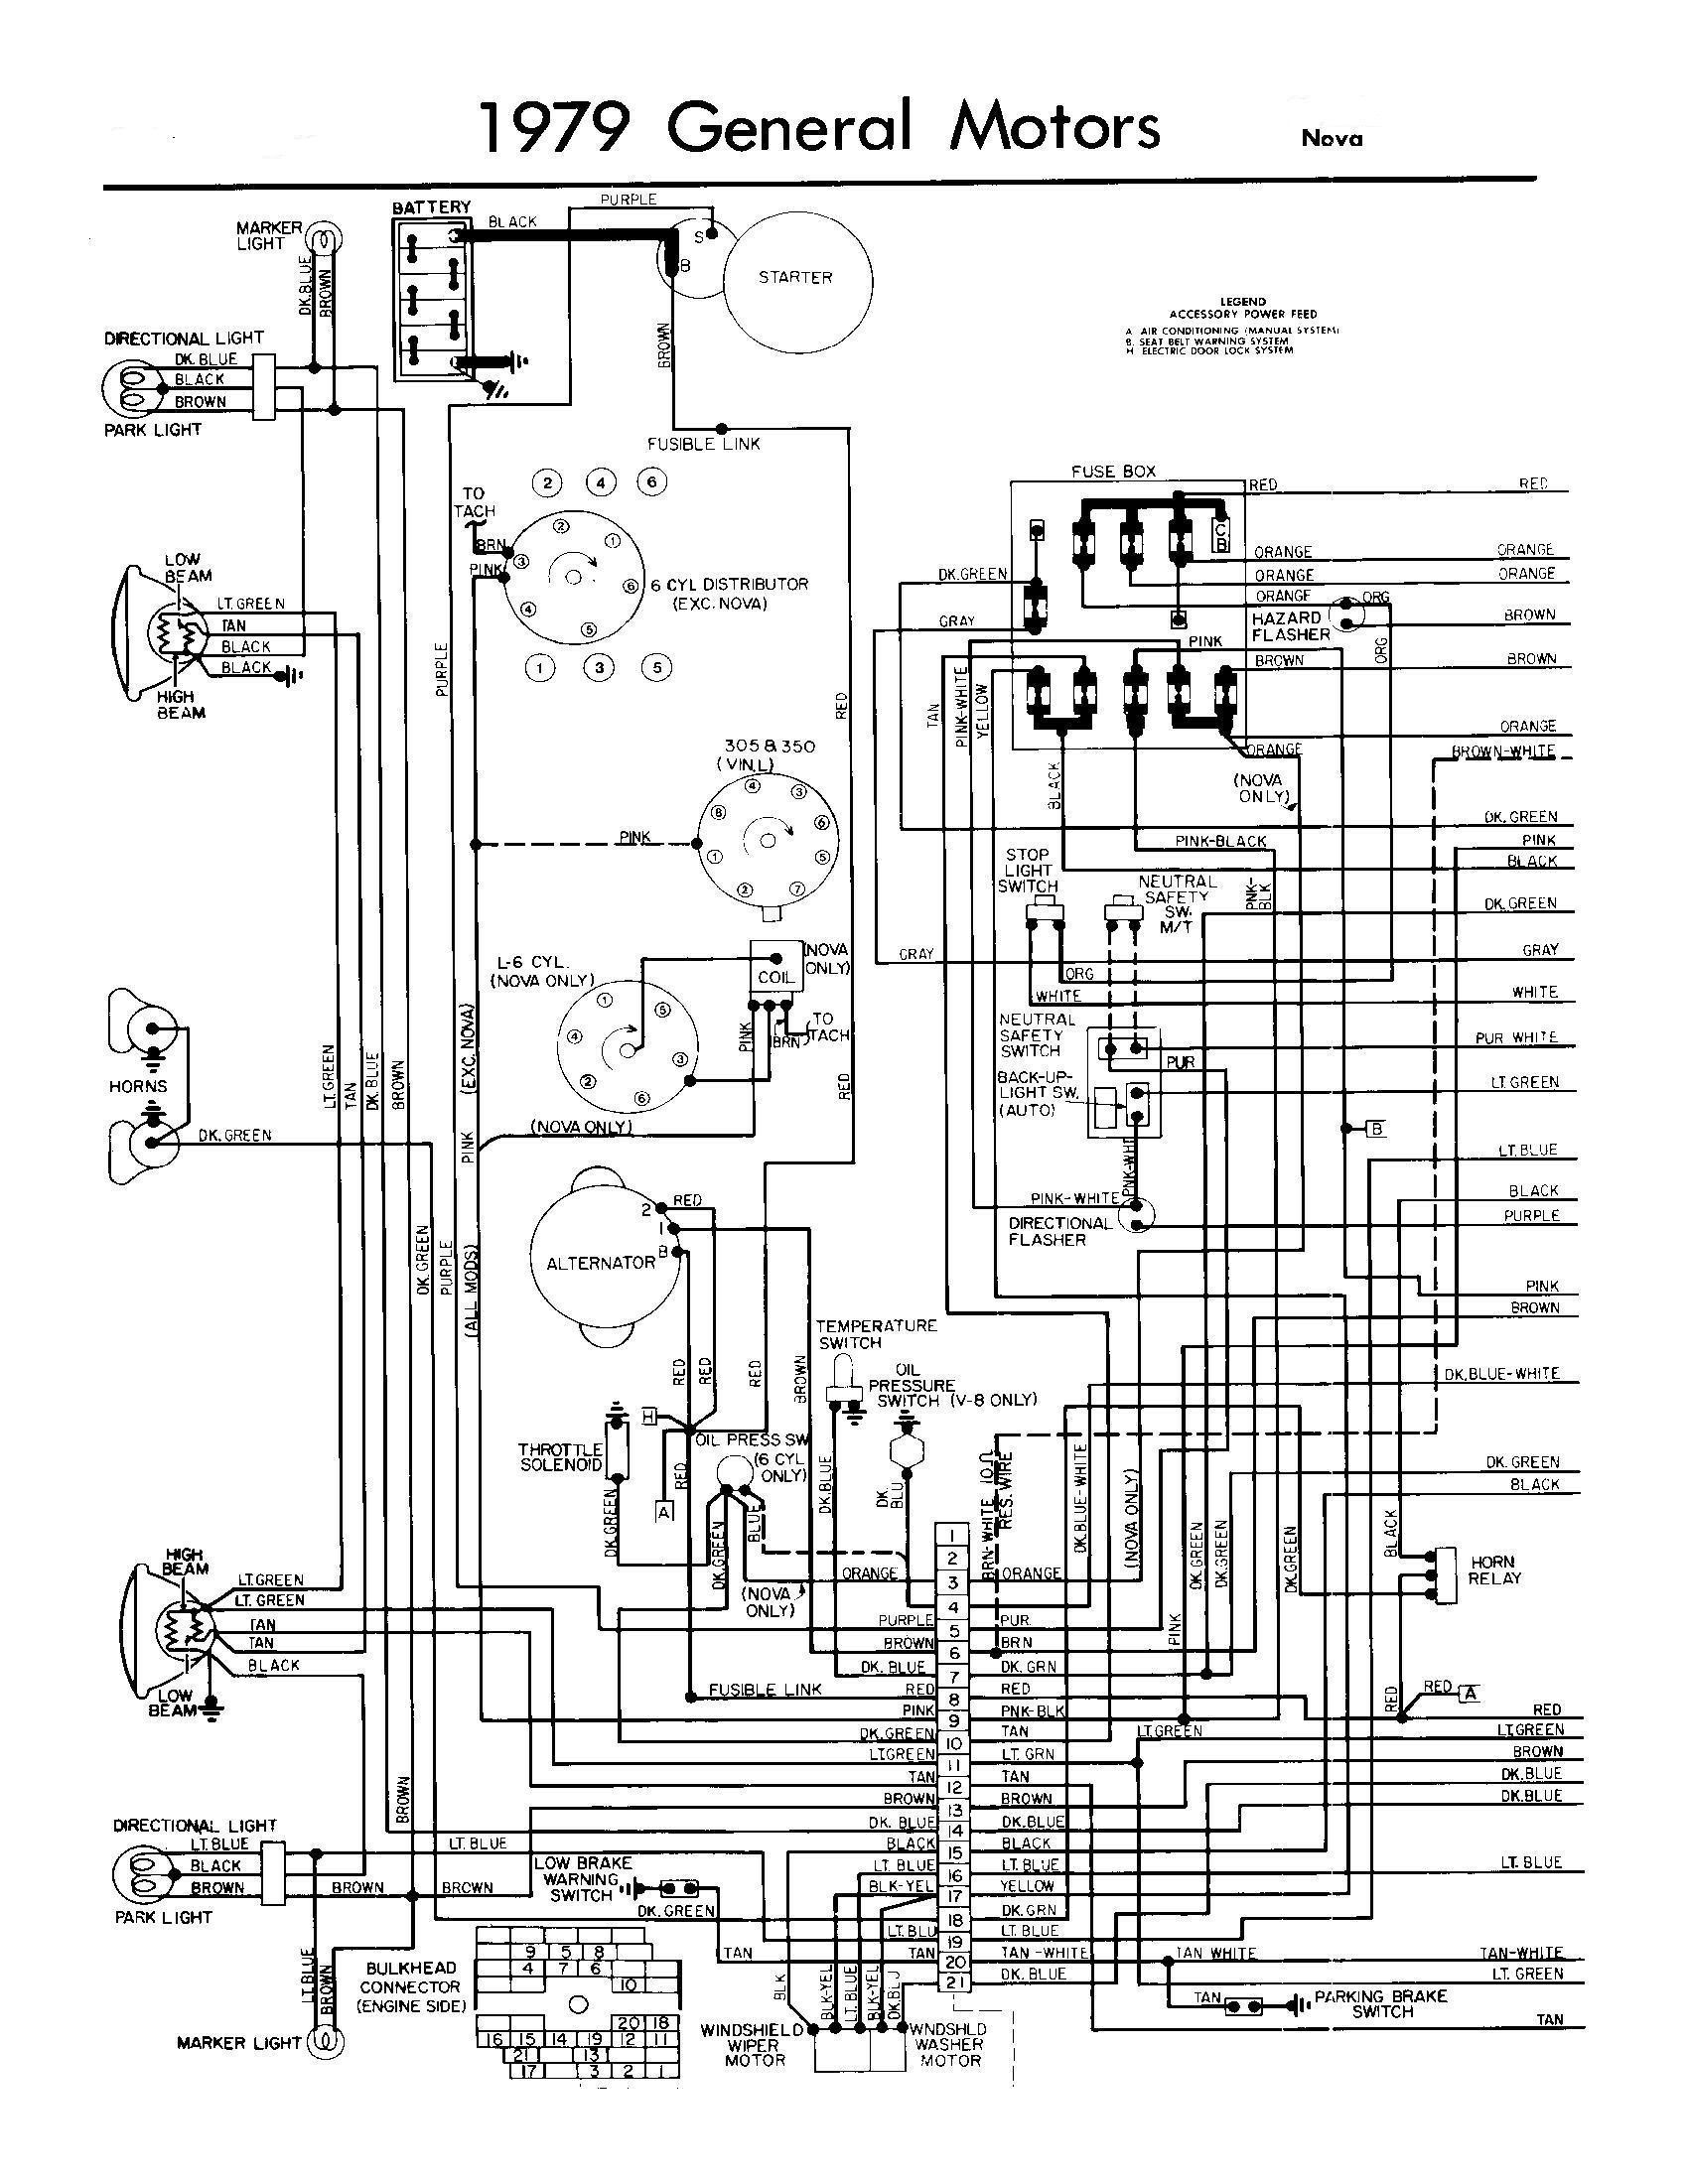 Wiring Diagrams for Cars All Generation Wiring Schematics Chevy Nova forum Of Wiring Diagrams for Cars